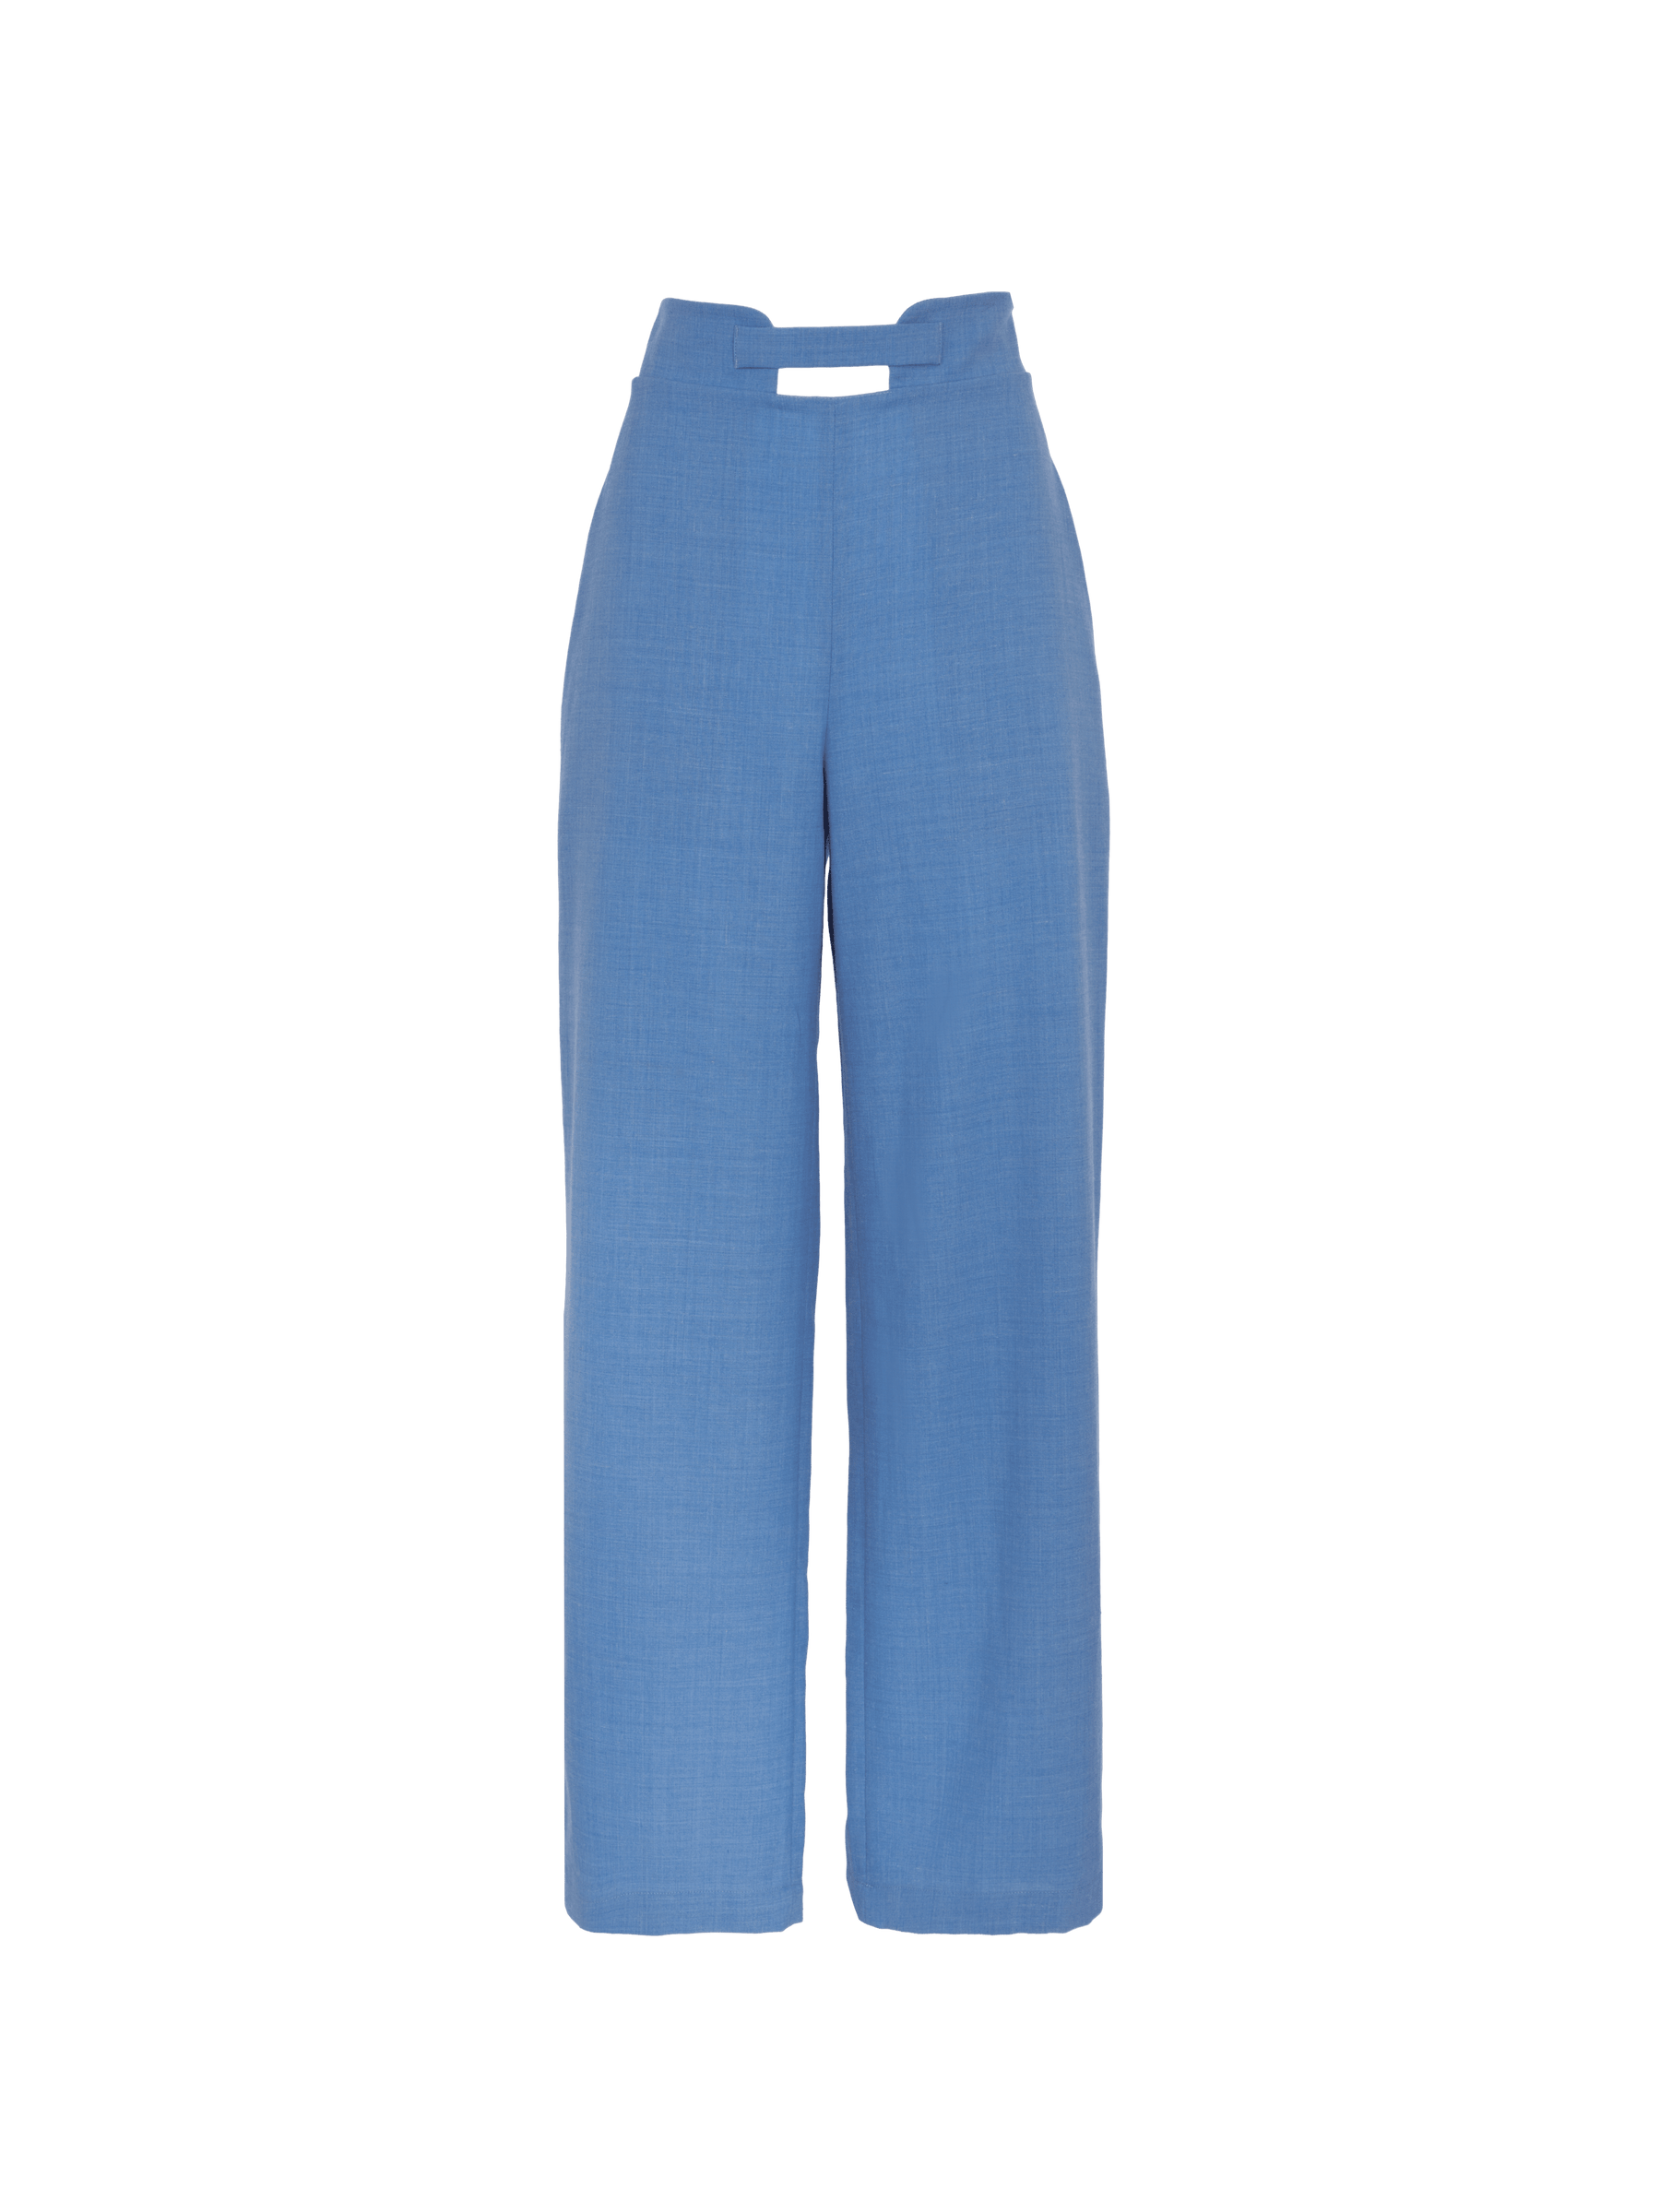 ACIS - High-waisted pants in Linen  and blue tencel Trousers Fête Impériale